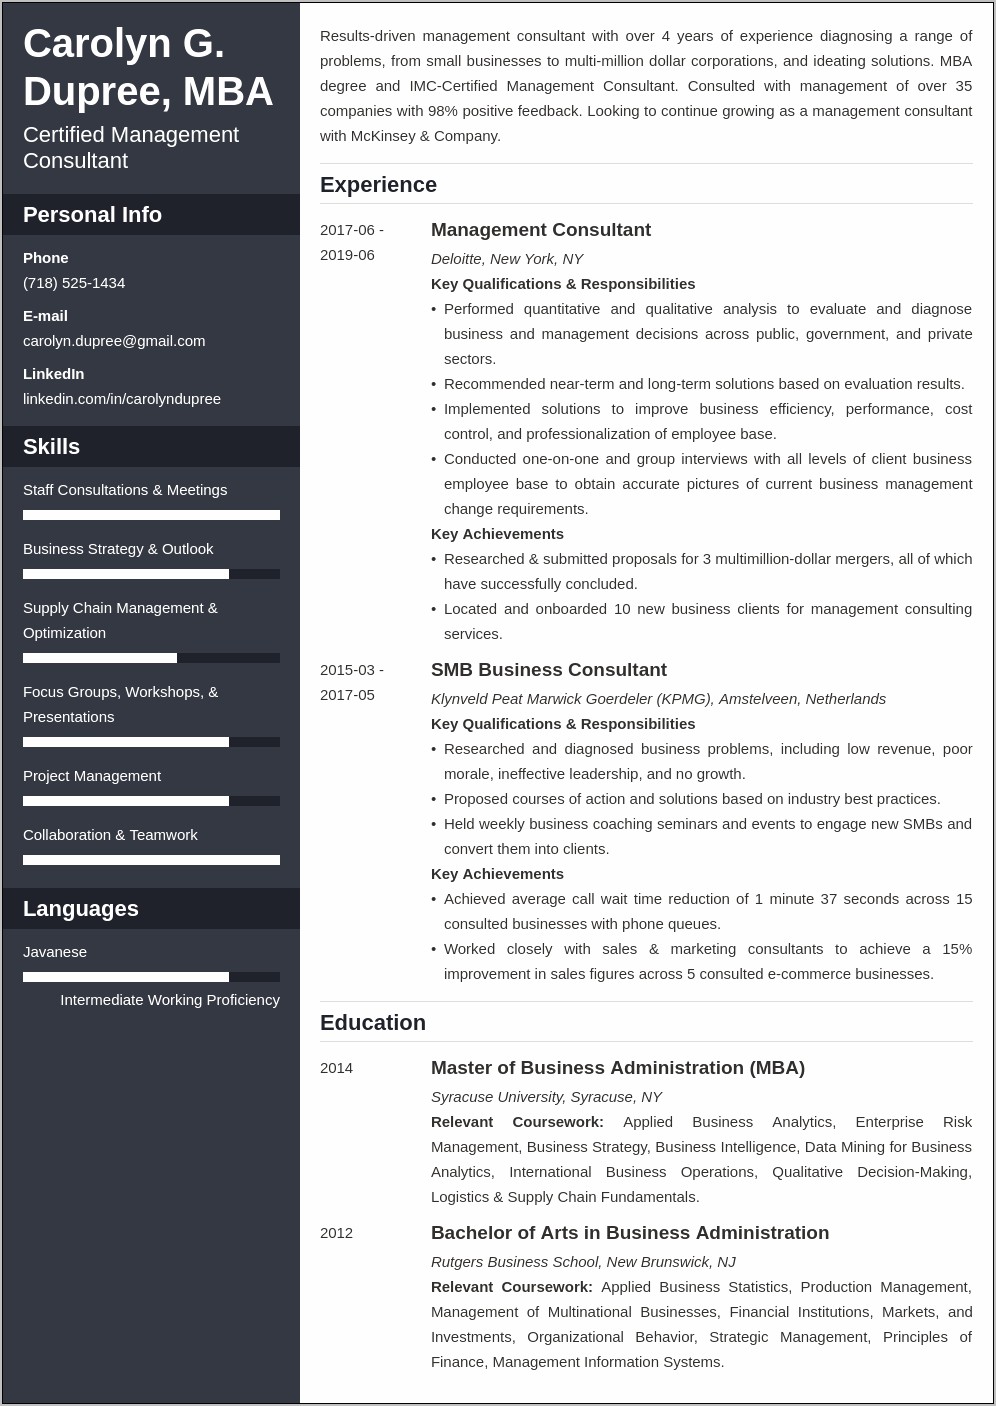 Resume Examples For Management Consulting